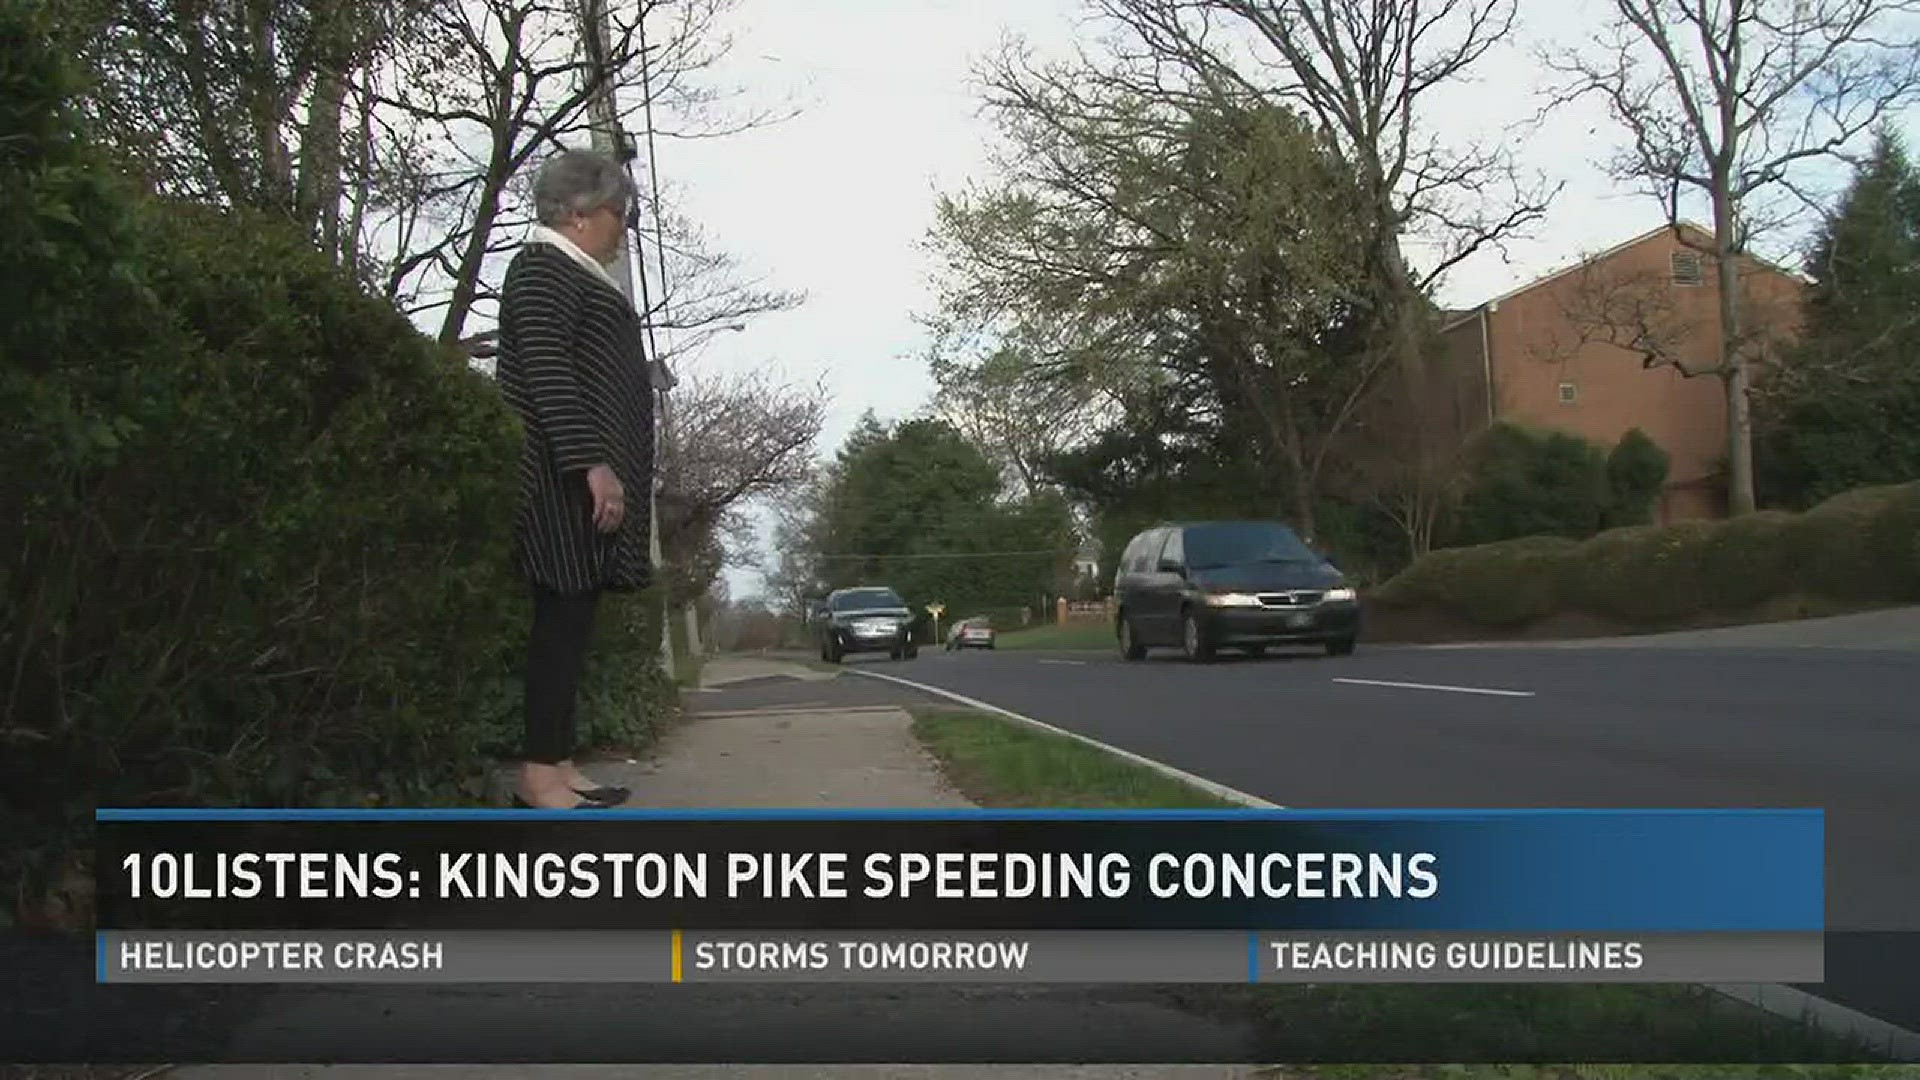 April 4, 2017: A viewer living on Kingston Pike says crashes caused by speeding cars is forcing her to make drastic changes to keep loved ones safe.